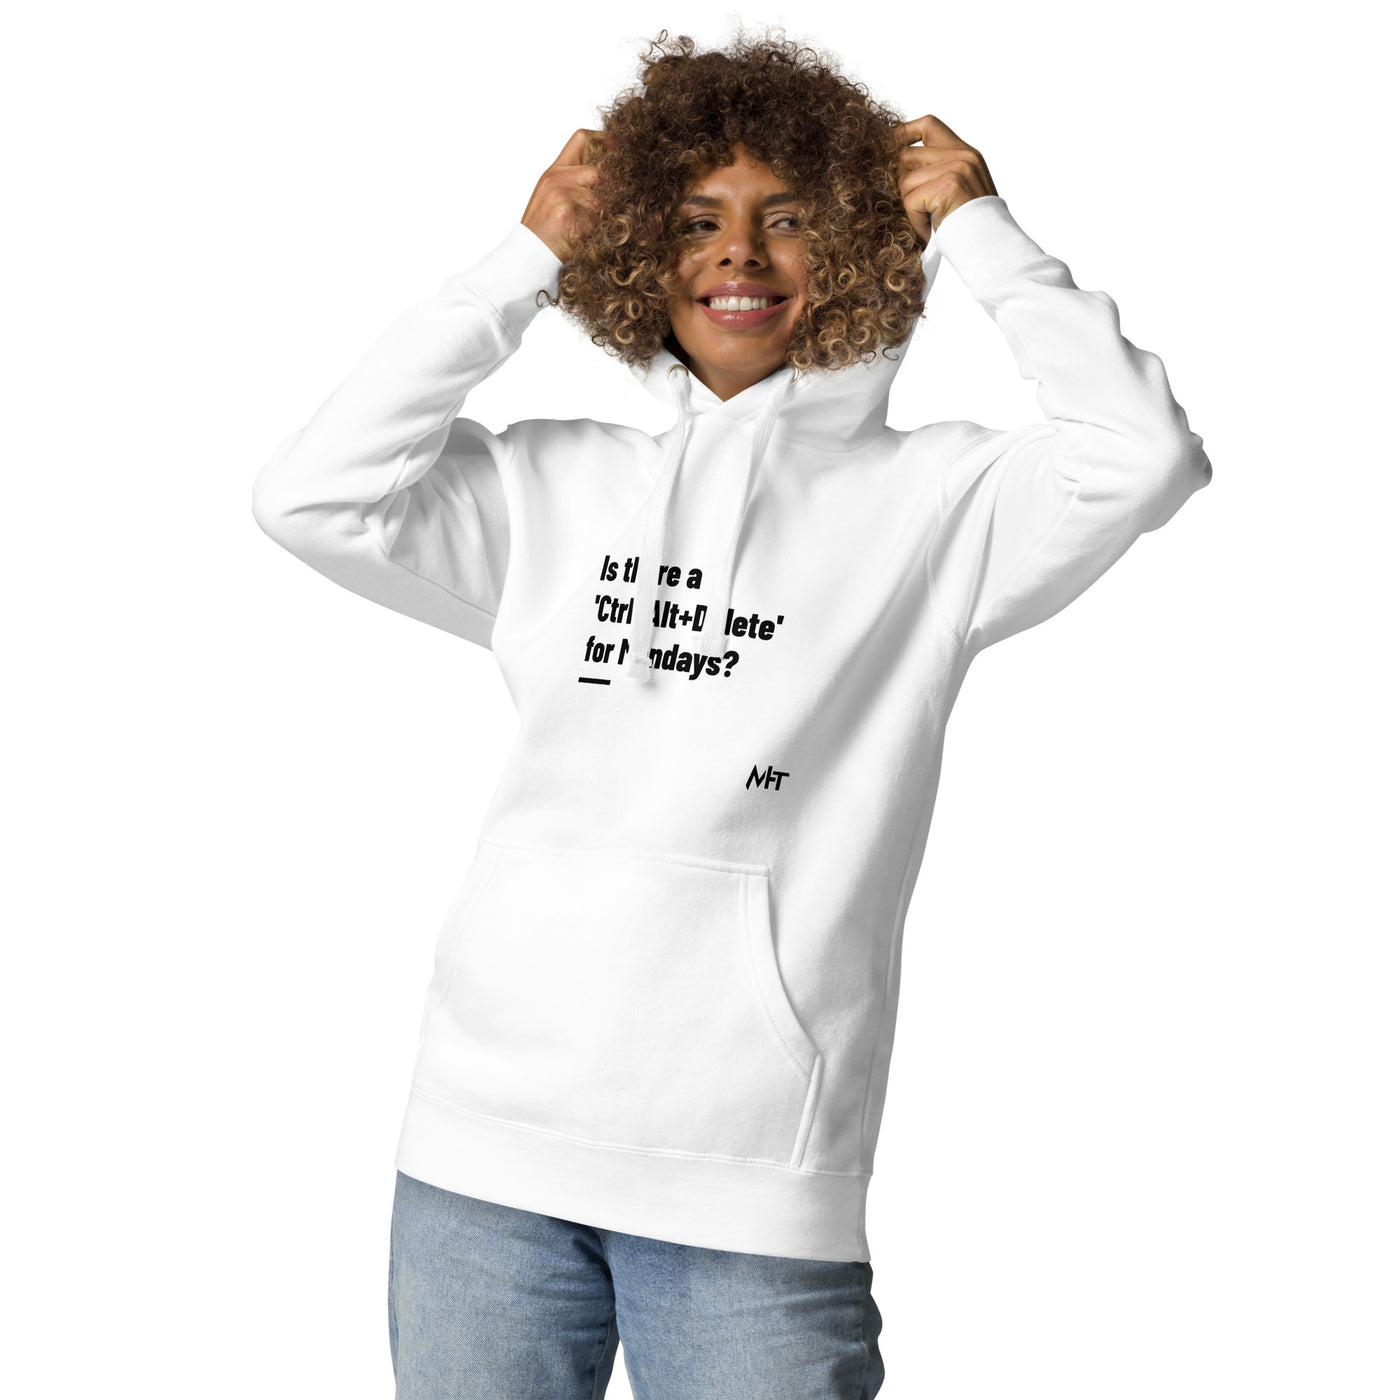 Is there a 'Ctrl+Alt+Delete' for Mondays? - Unisex Hoodie ( Back Print )